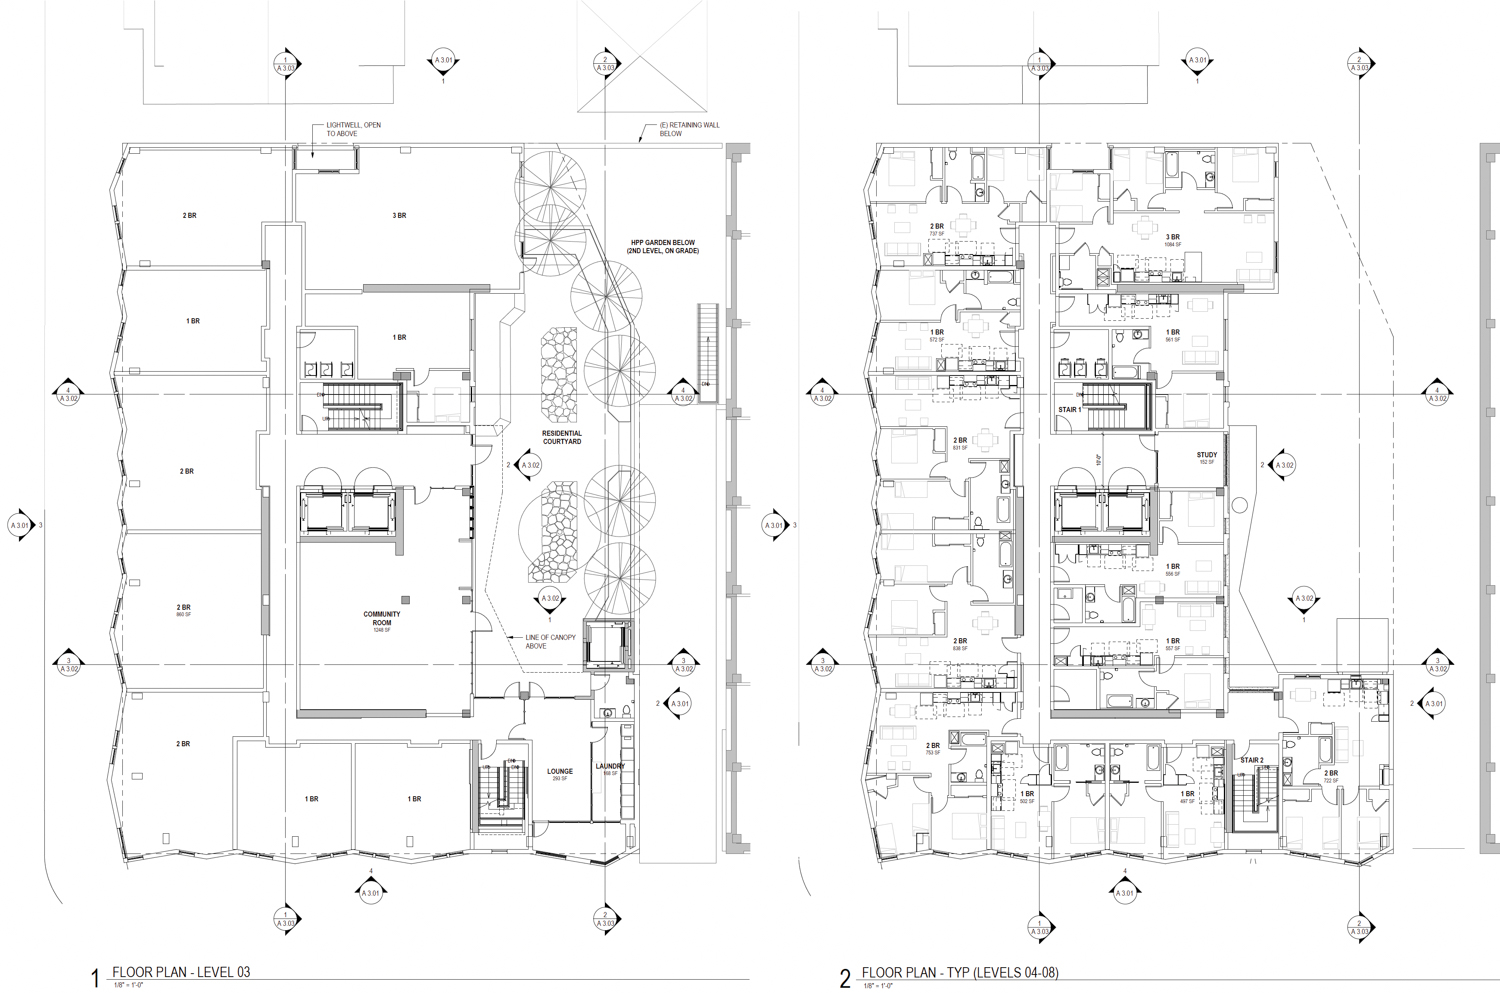 2530 18th Street third and fourth level floor plans, illustration by Mithun